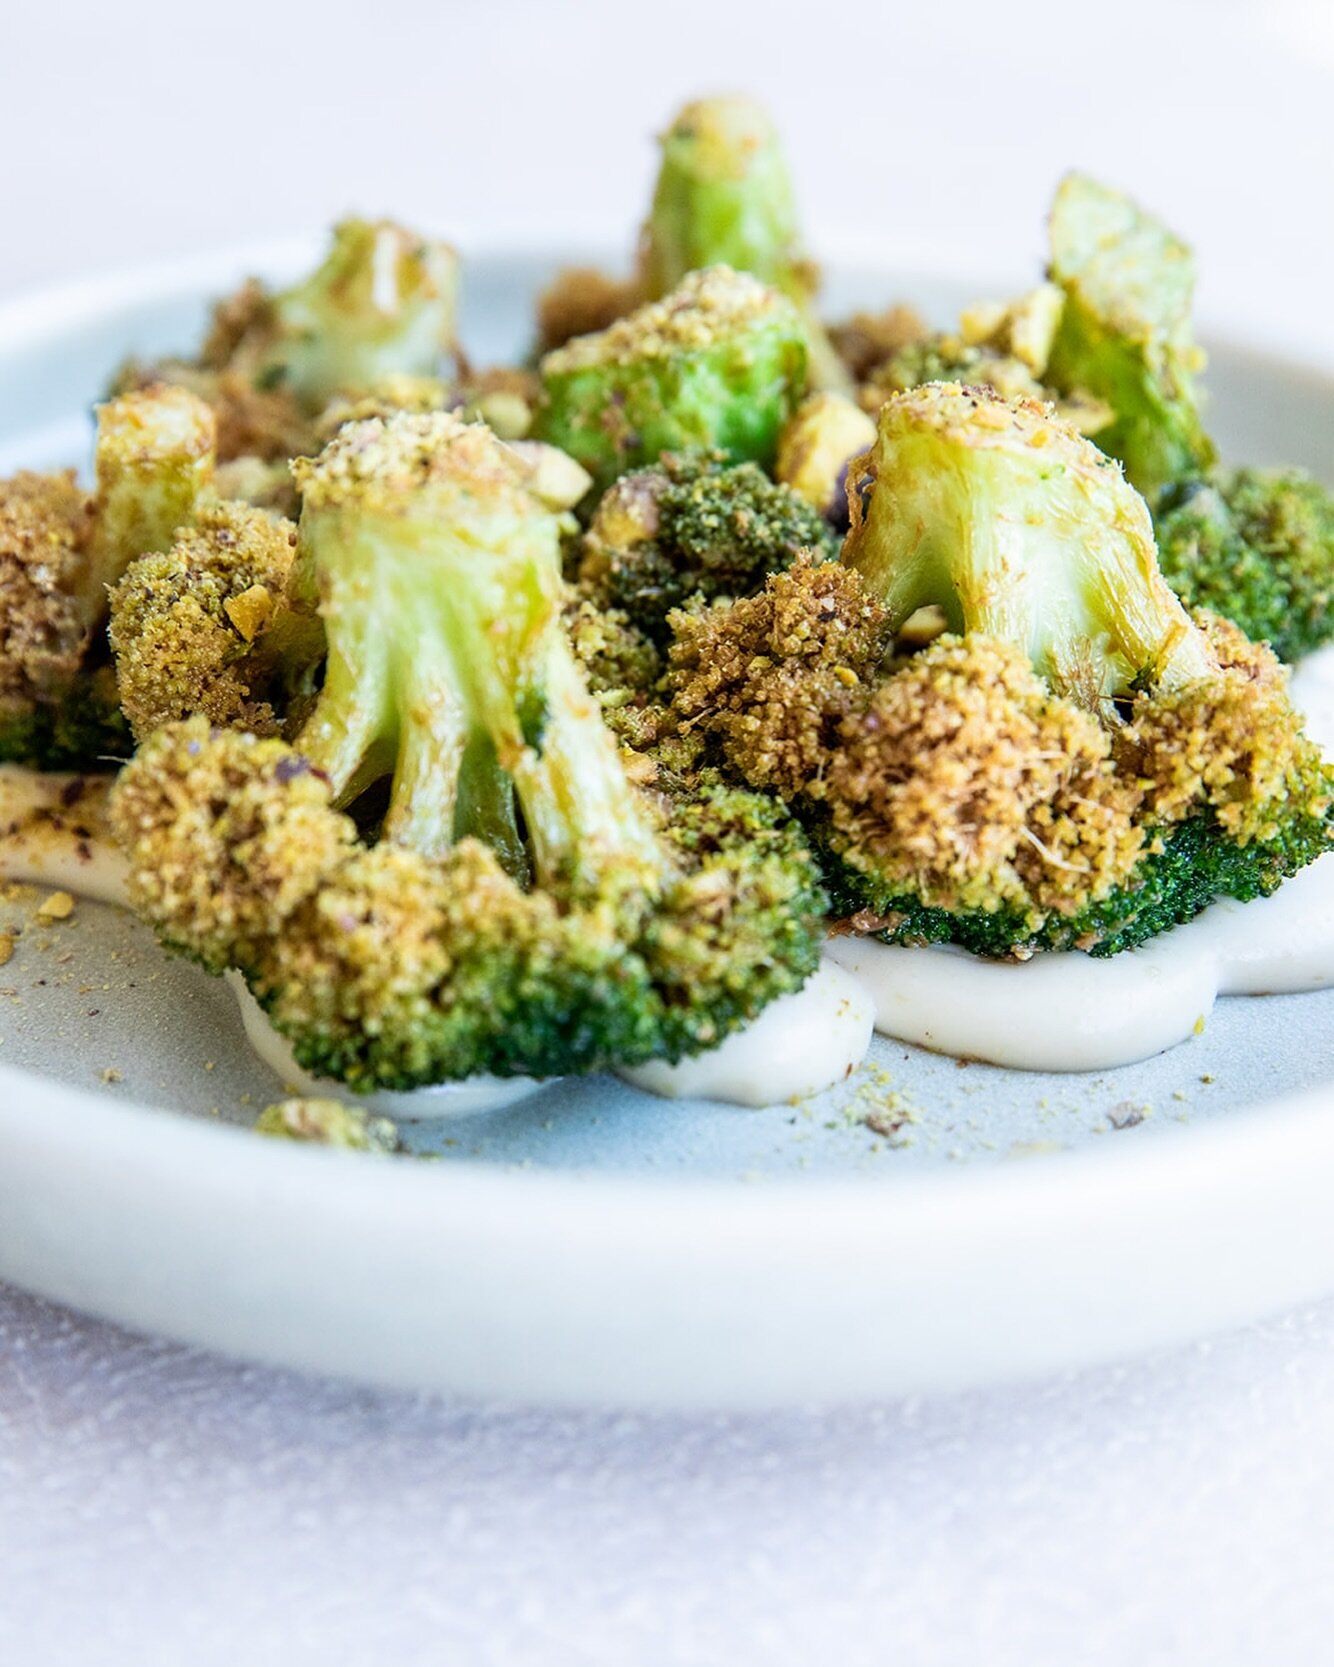 🥦 Broccoli 🥦 like you&rsquo;ll never forget it! 

Crispy broccoli served over ginger sauce, topped with pistachios and ginger salt. 

📸 @rachelchevell

#themezclub #byronbay #byronbayeats #byronbayrestaurants #visitbyronbay #destinationbyronbay #d